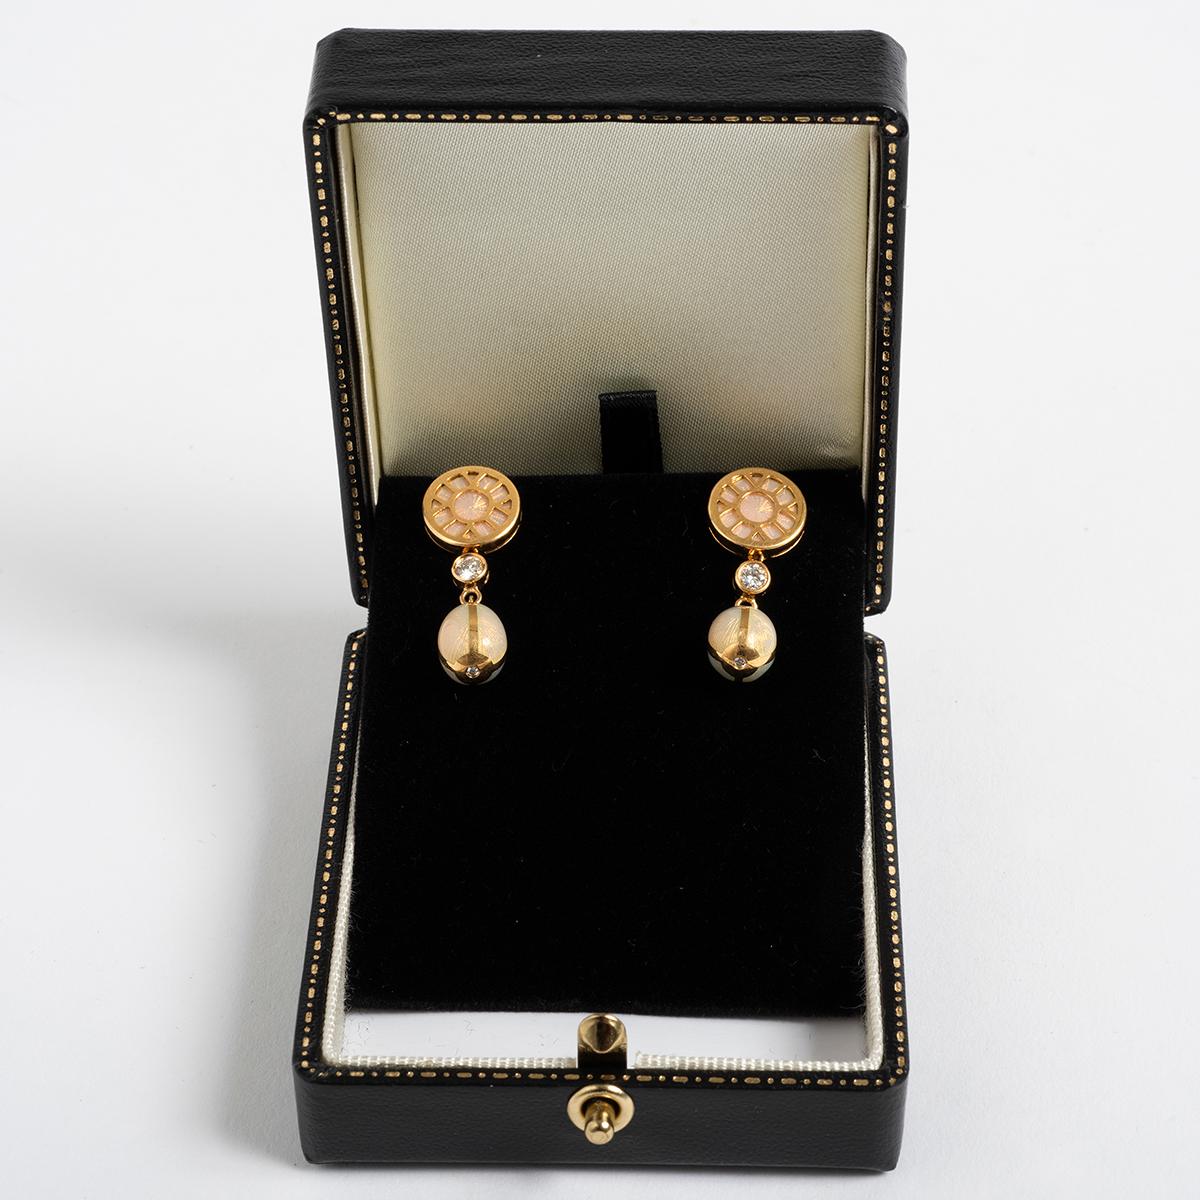 Our Faberge Heritage 18k Yellow Gold Diamond Enamel Drop Earrings (ref 1452) are presented in excellent condition with only light signs of use. Featuring four round white diamonds totalling 0.22cts and enamel, they are set in 18 carat yellow gold,